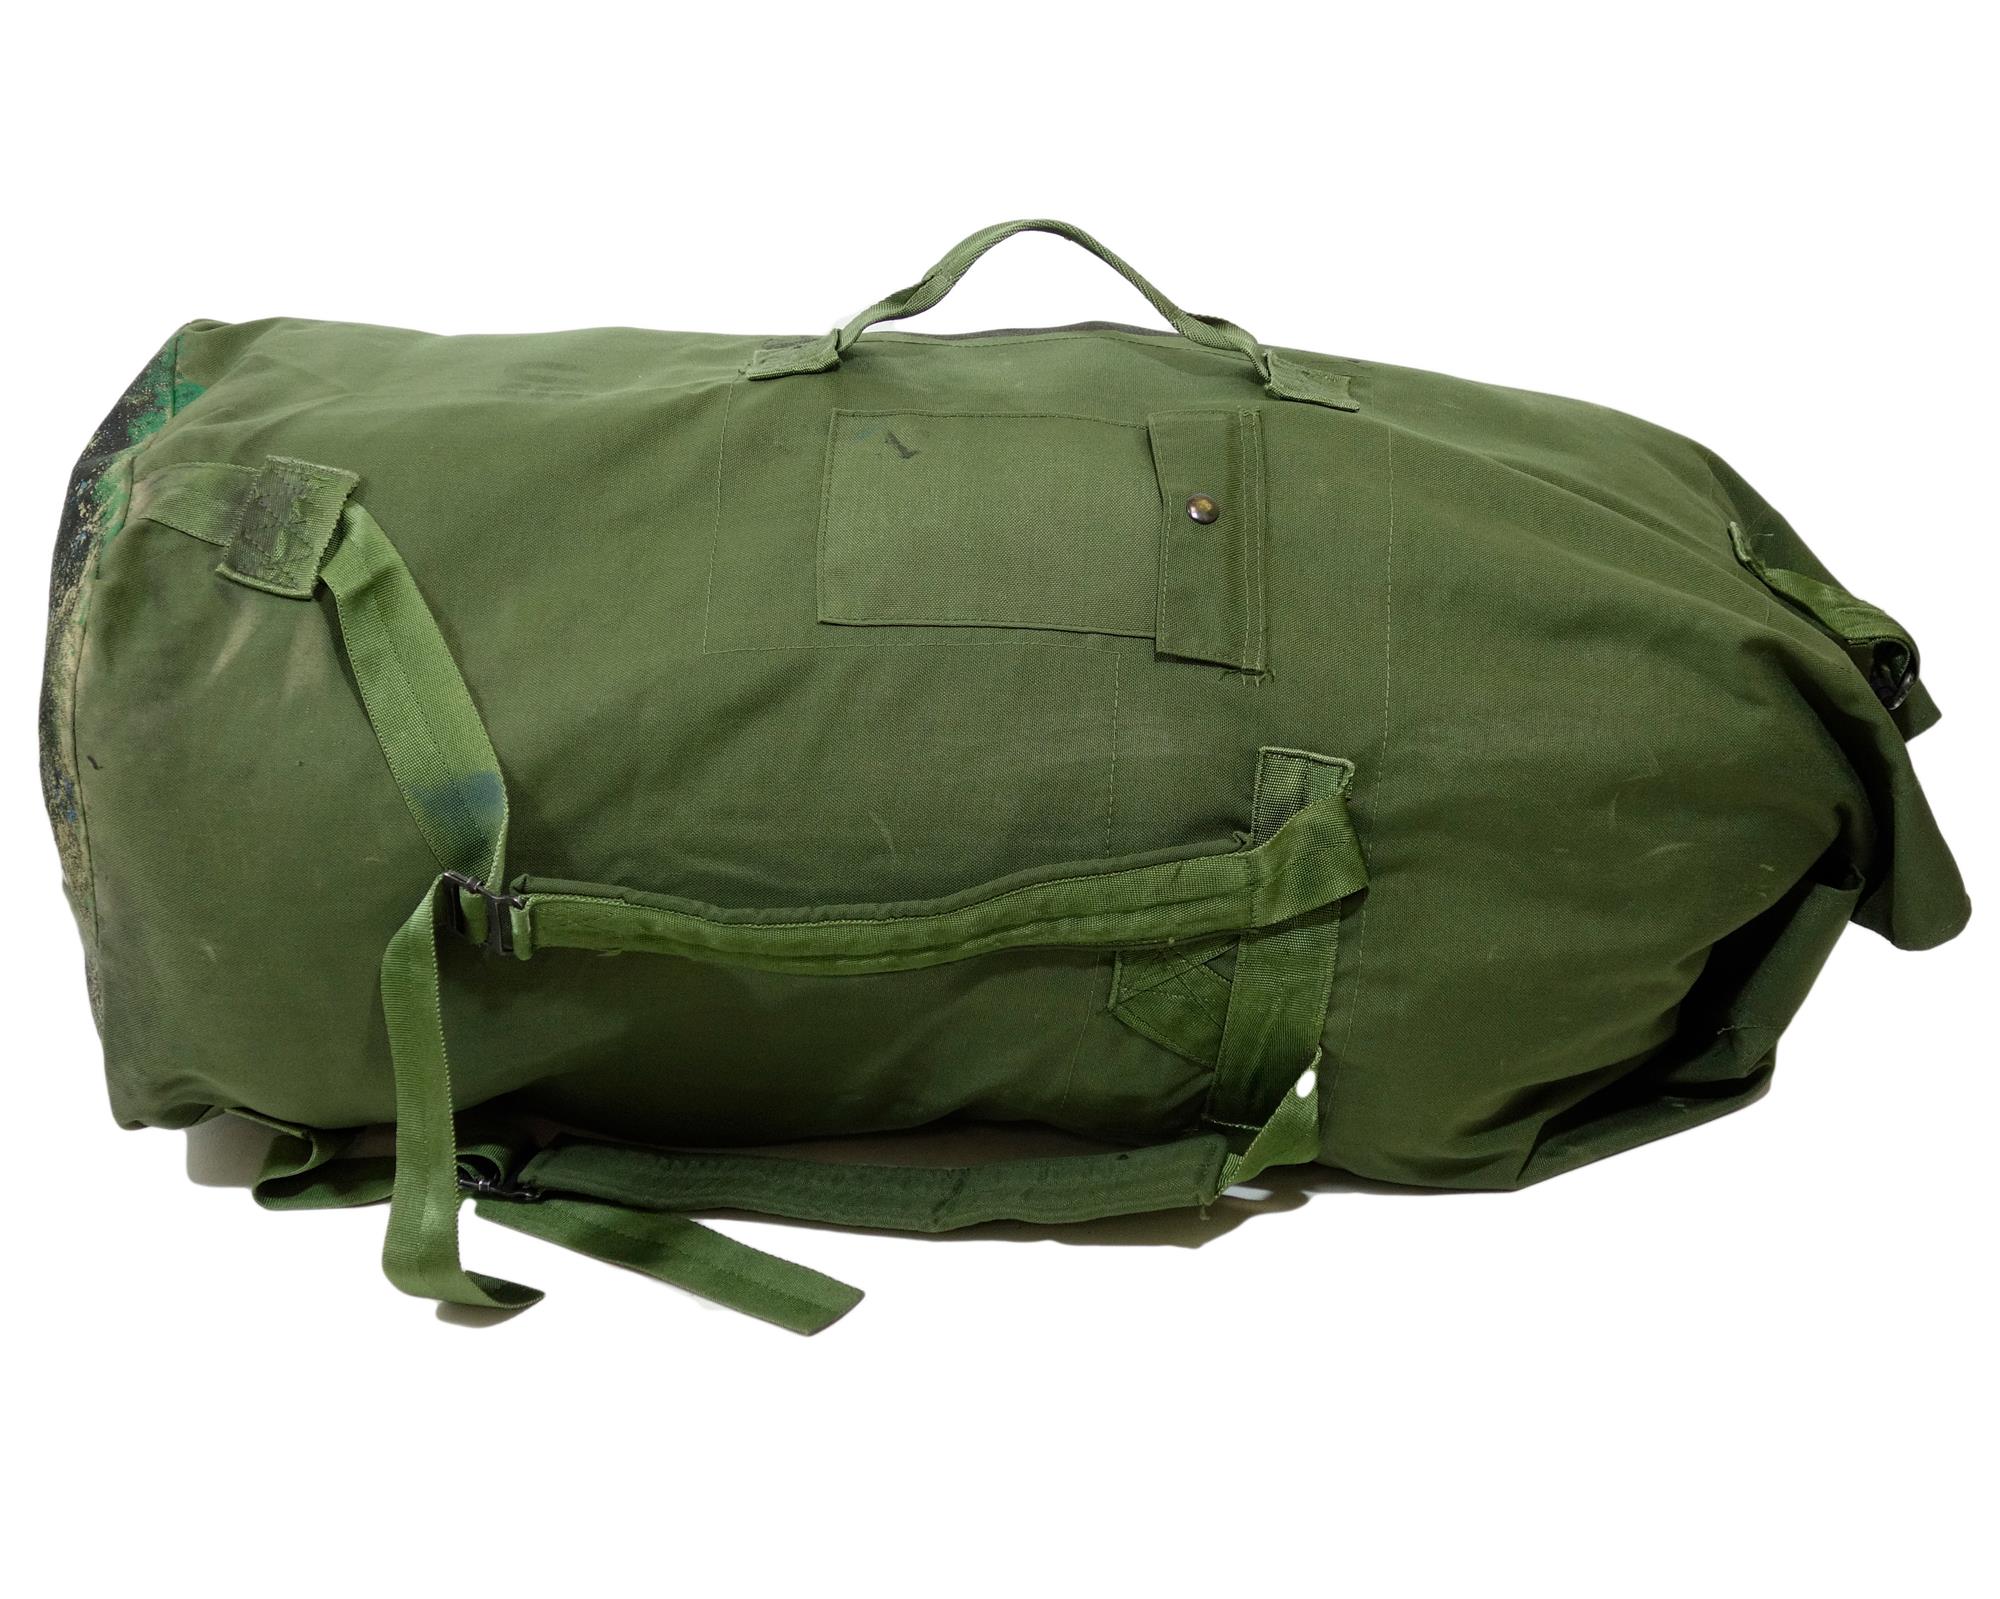 US Army Surplus Large Duffle Bag With Shoulder Straps Carrying Handle ...